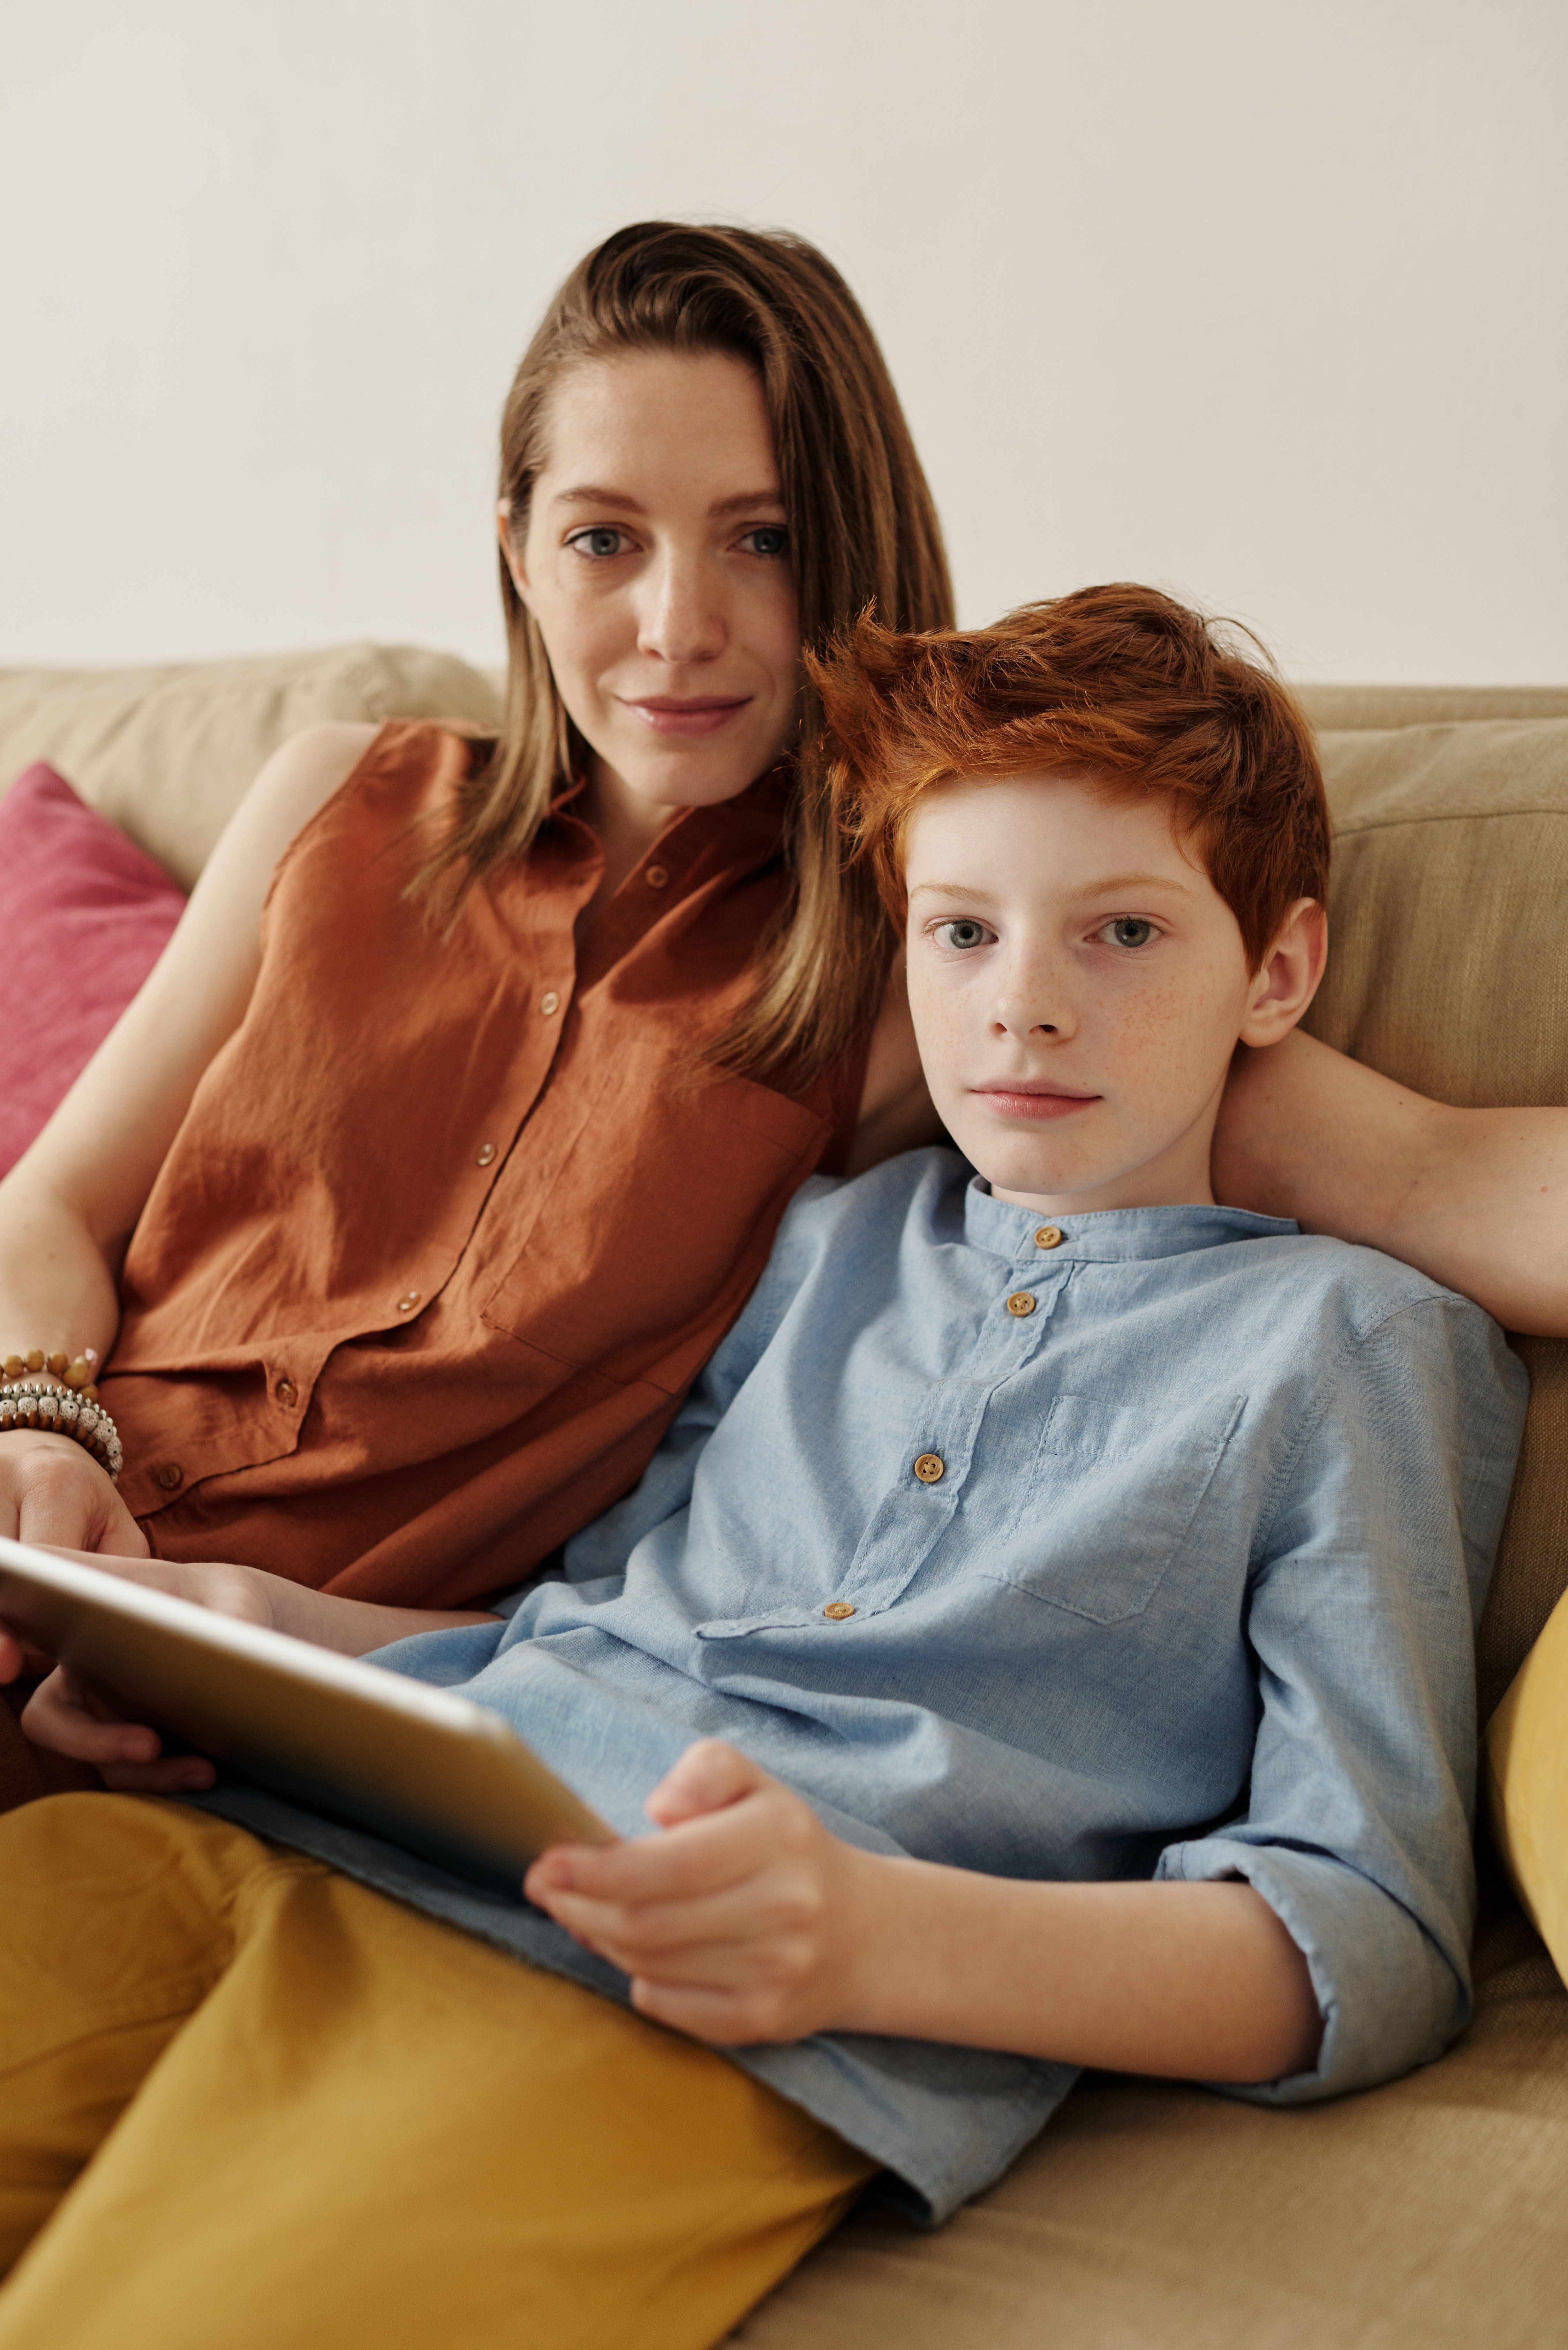 Mother and son sitting on a sofa | Photo: Pexels